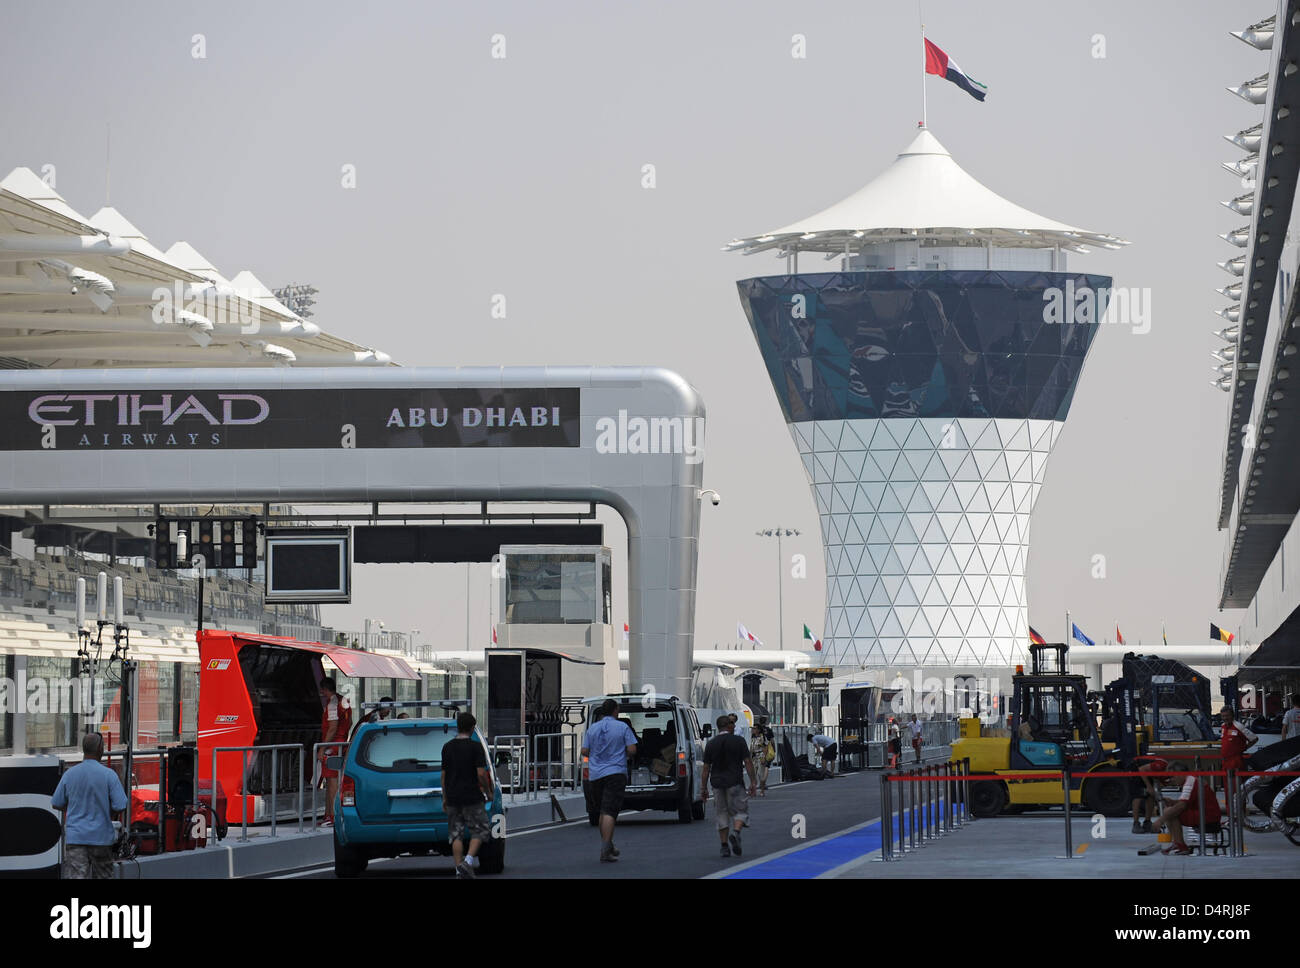 The pitlane of the newly built Yas Marina Circuit race track pictured in Abu  Dhabi, United Arab Emirates, 28 October 2009. The Formula One Grand Prix of Abu  Dhabi will take place